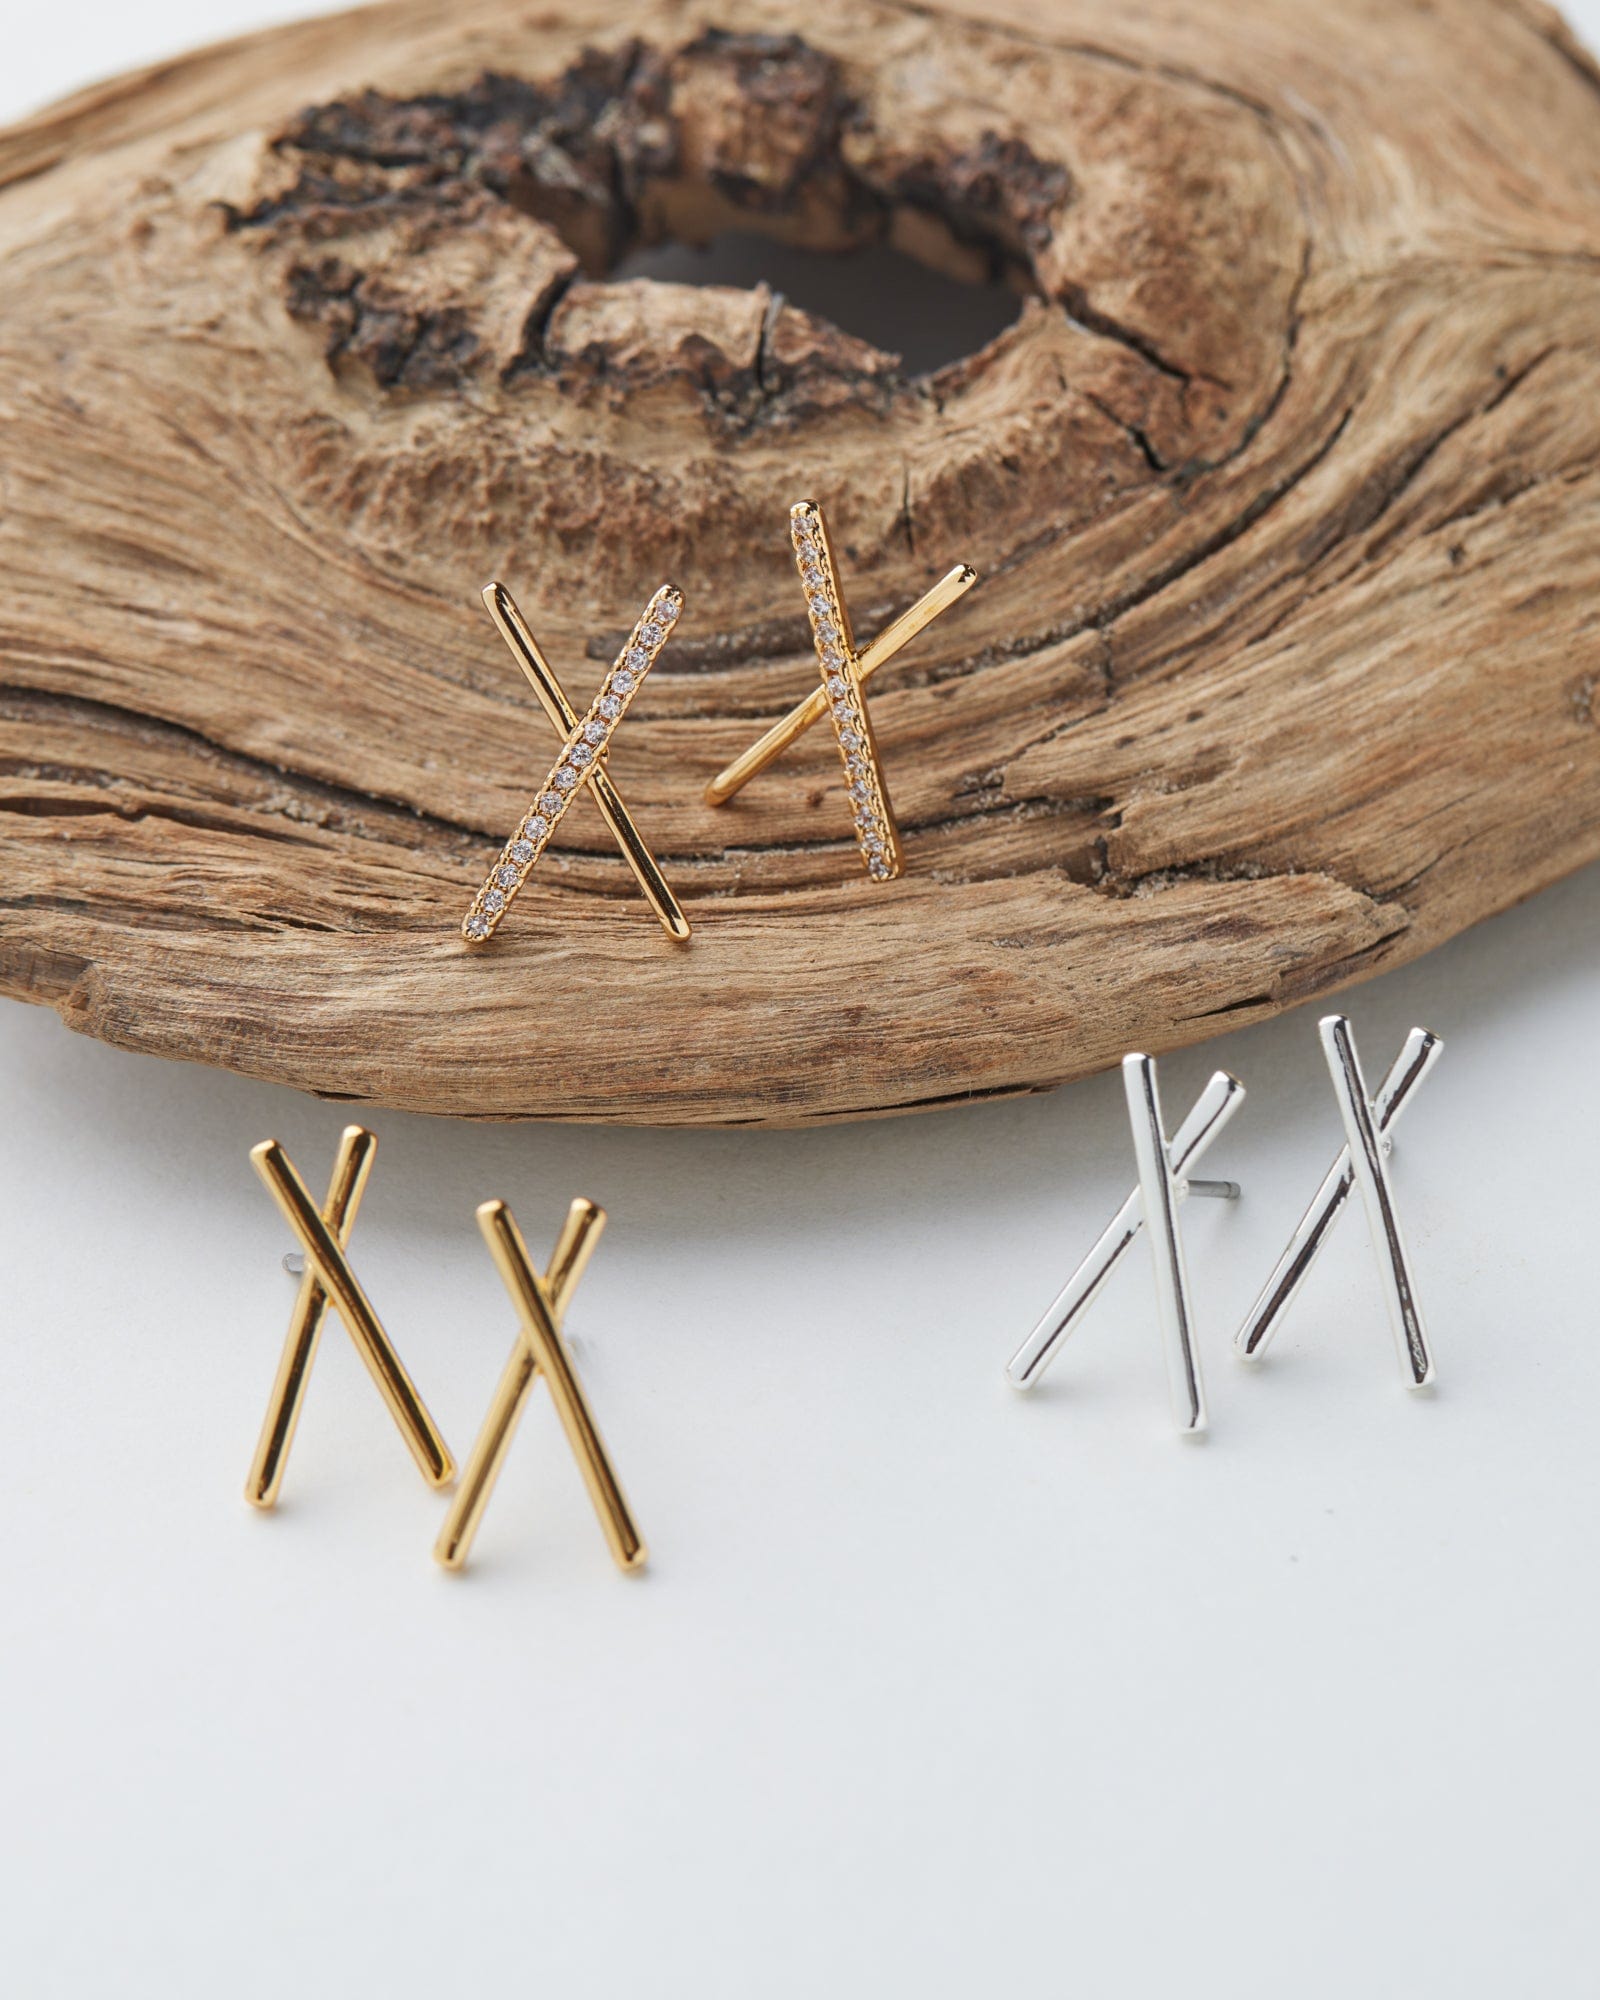 Set of earrings in "x" shapes in the colors gold, silver and gold with gems